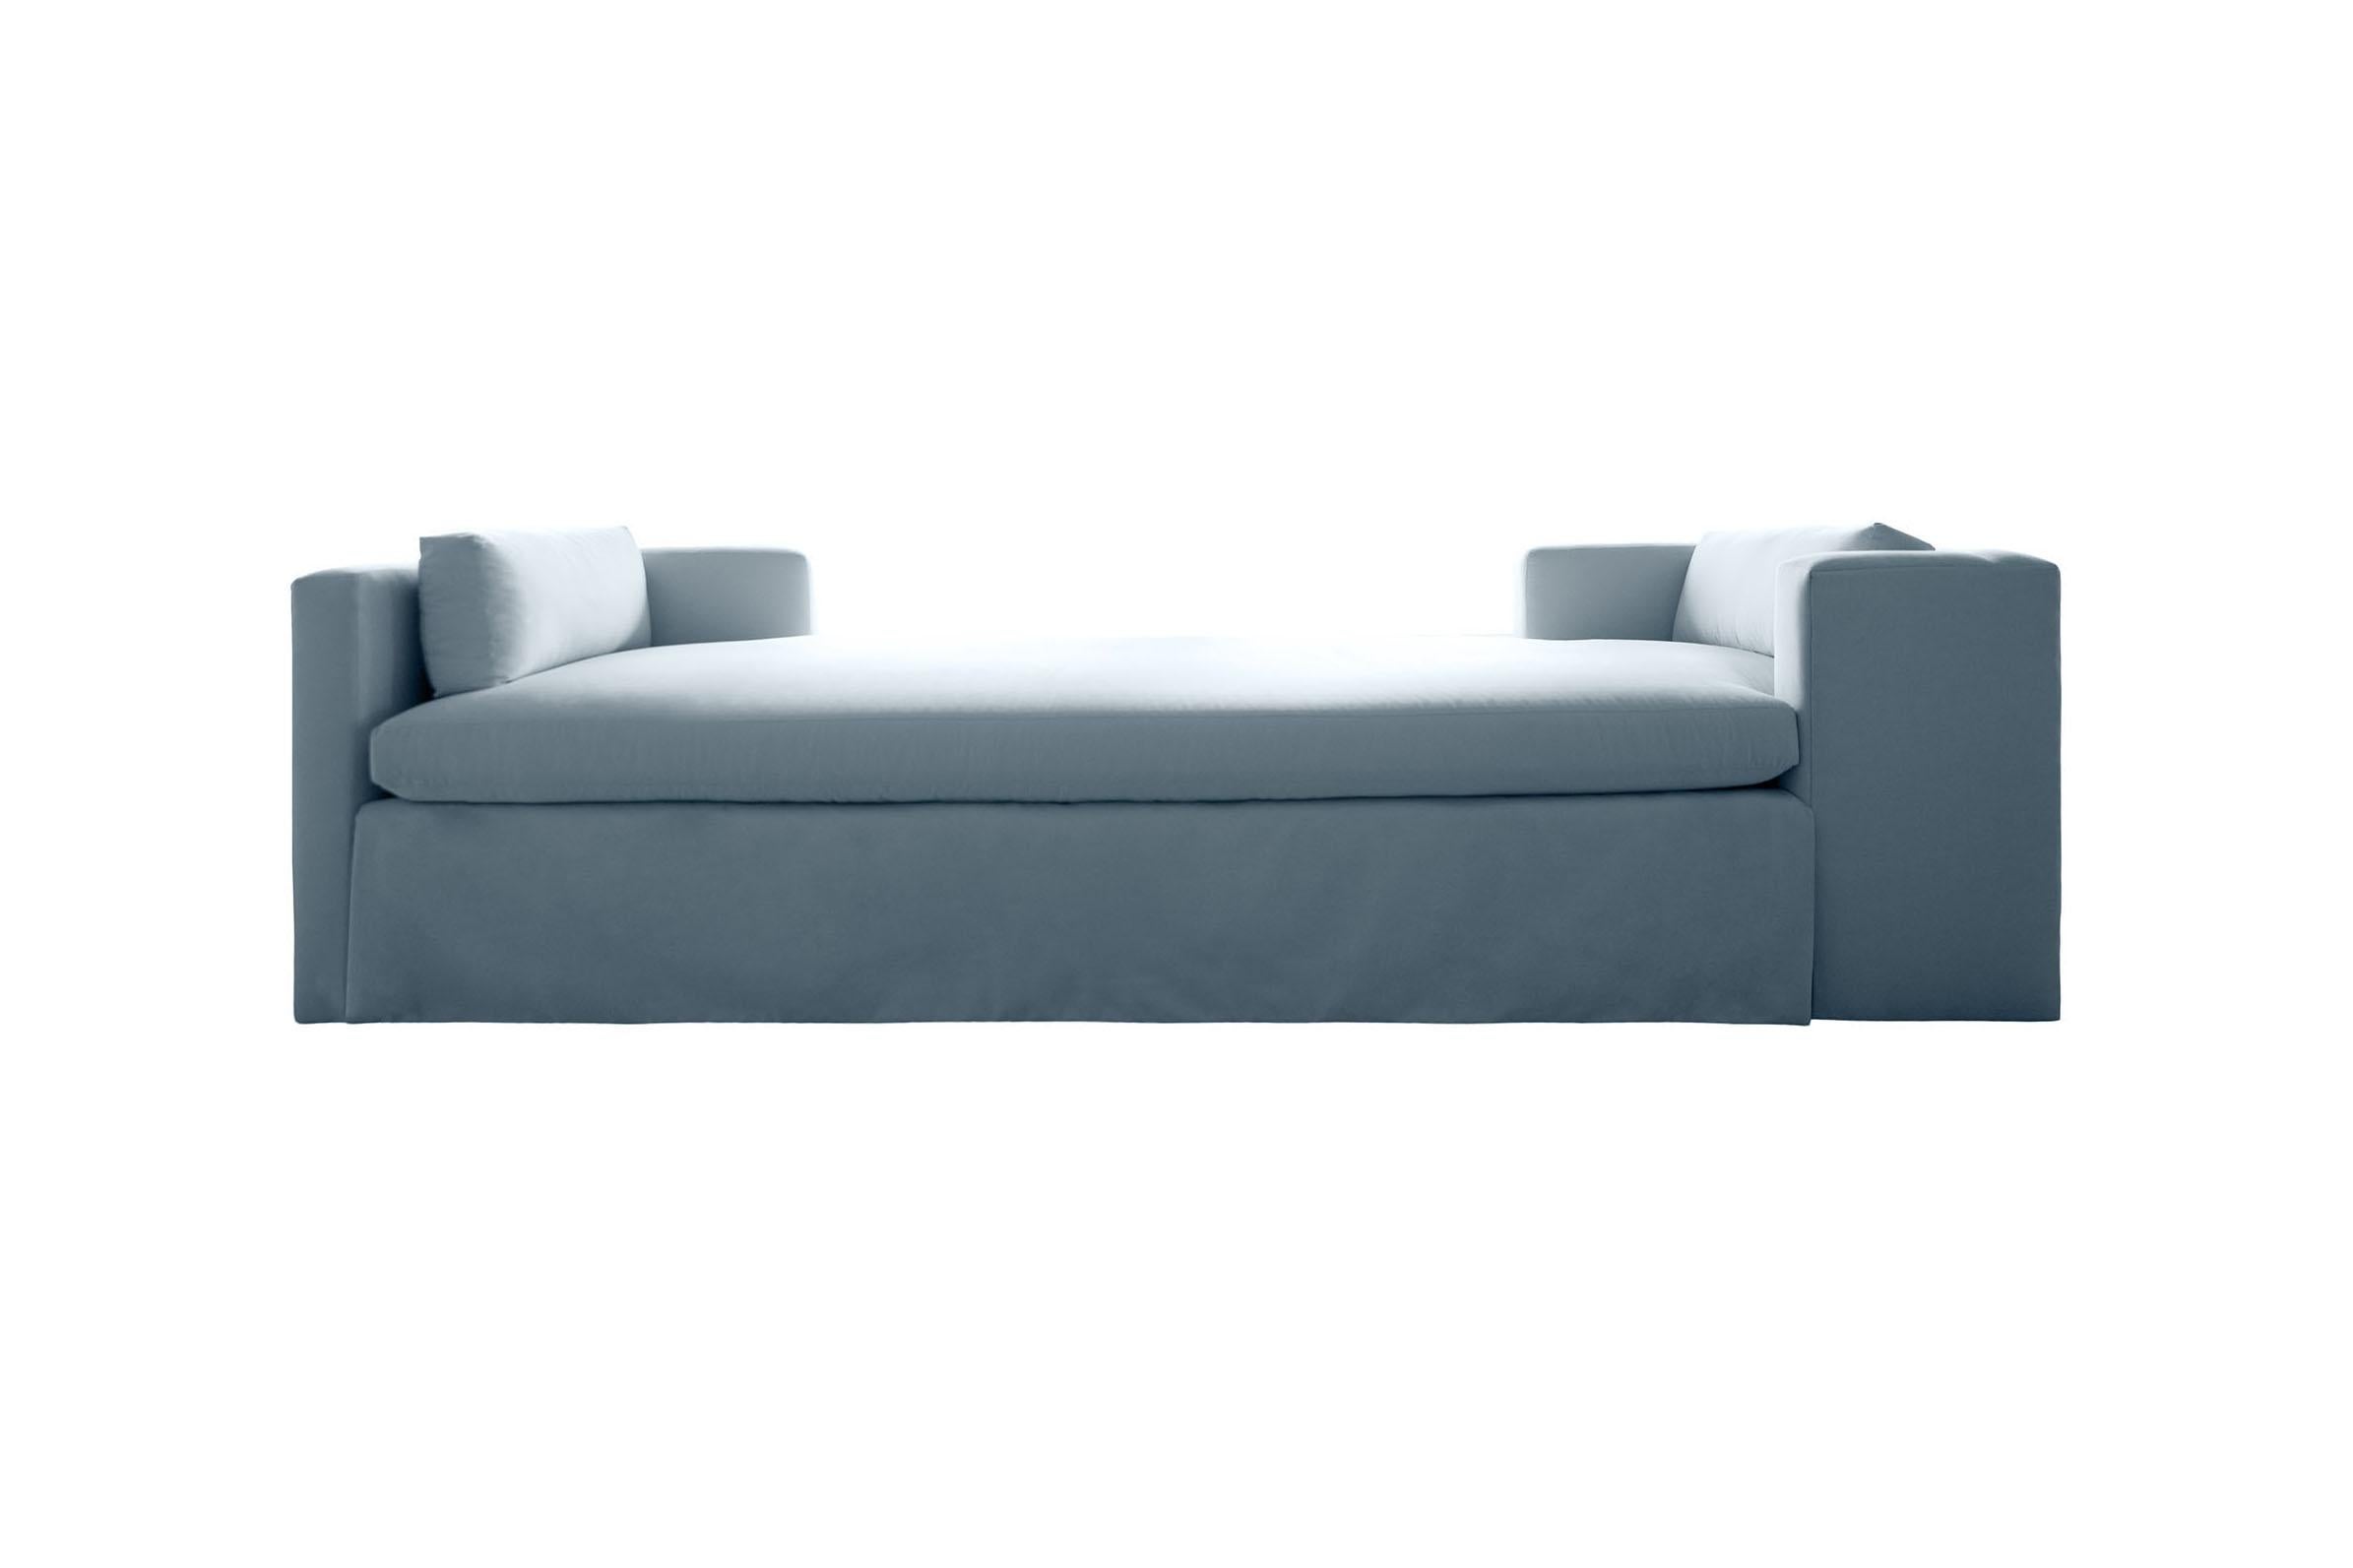 Lisa Tharp Collection  Streamlined Daybed 

Clean lines and plush comfort combine to inspire serious lounging. Long low profile is comfortable by the window or floating in the middle of an open plan. Styled to suit Classic and modern interiors